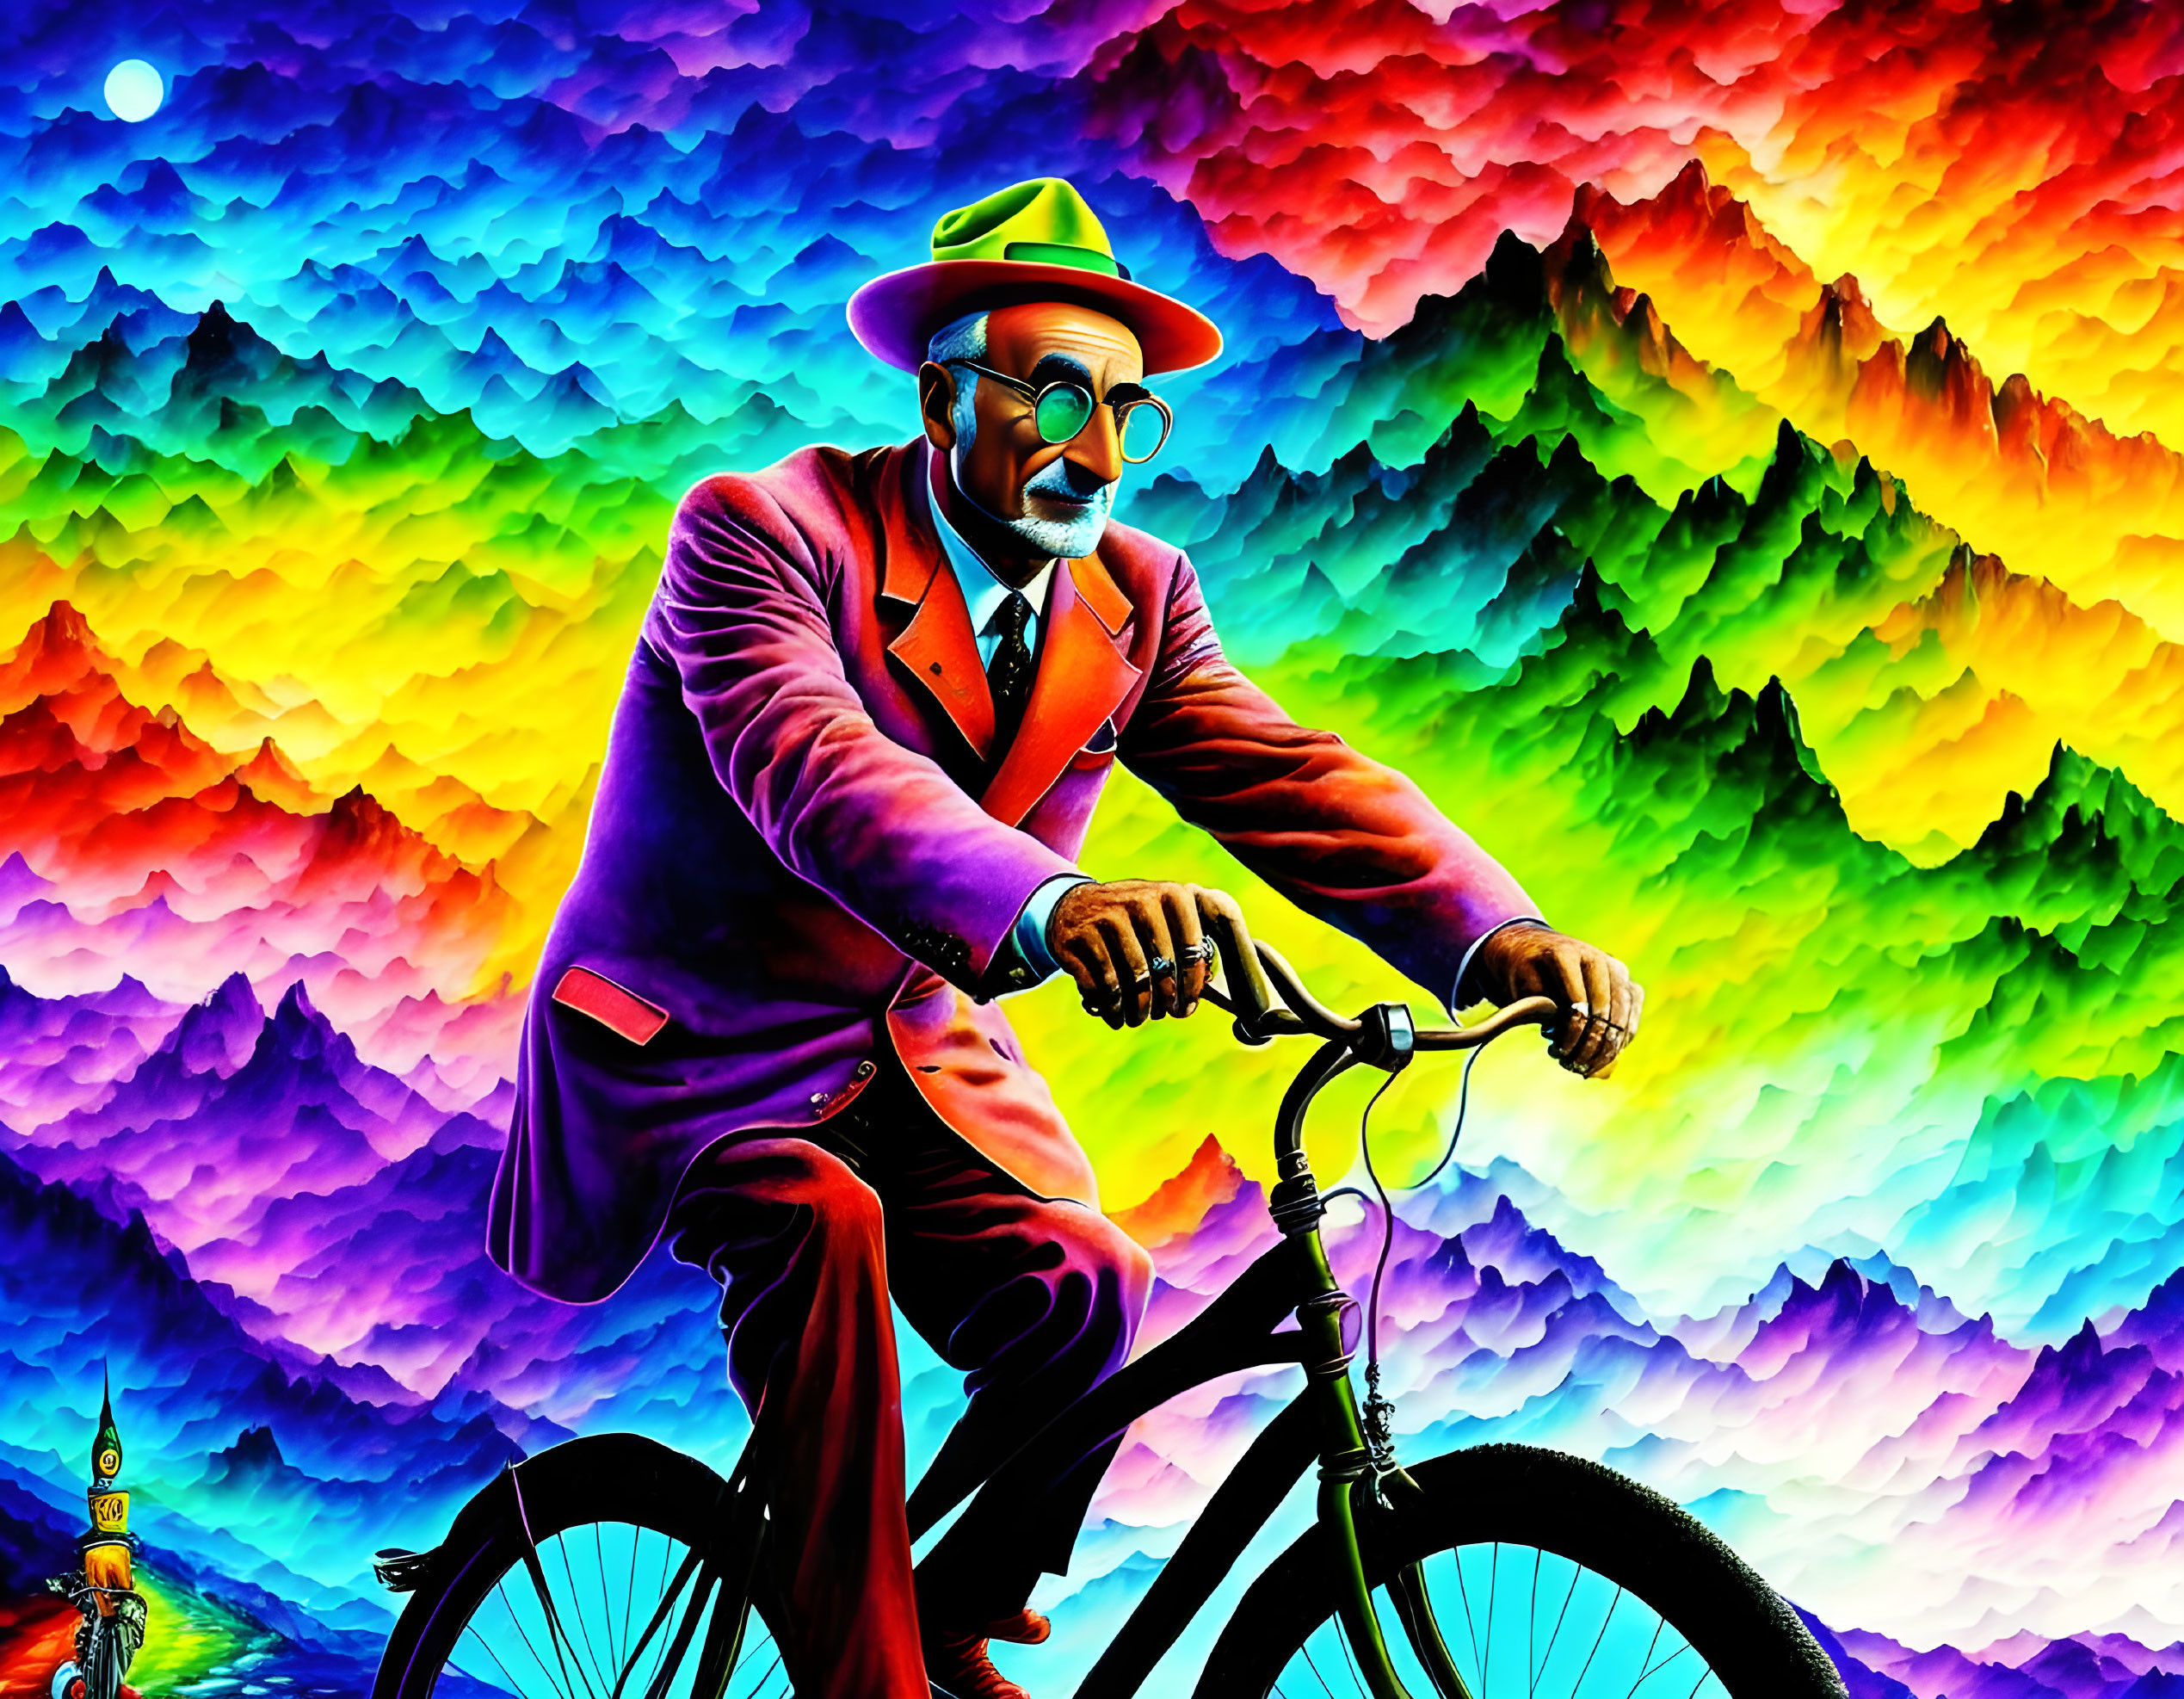 Colorful Artwork: Stylish Man on Bicycle in Psychedelic Background